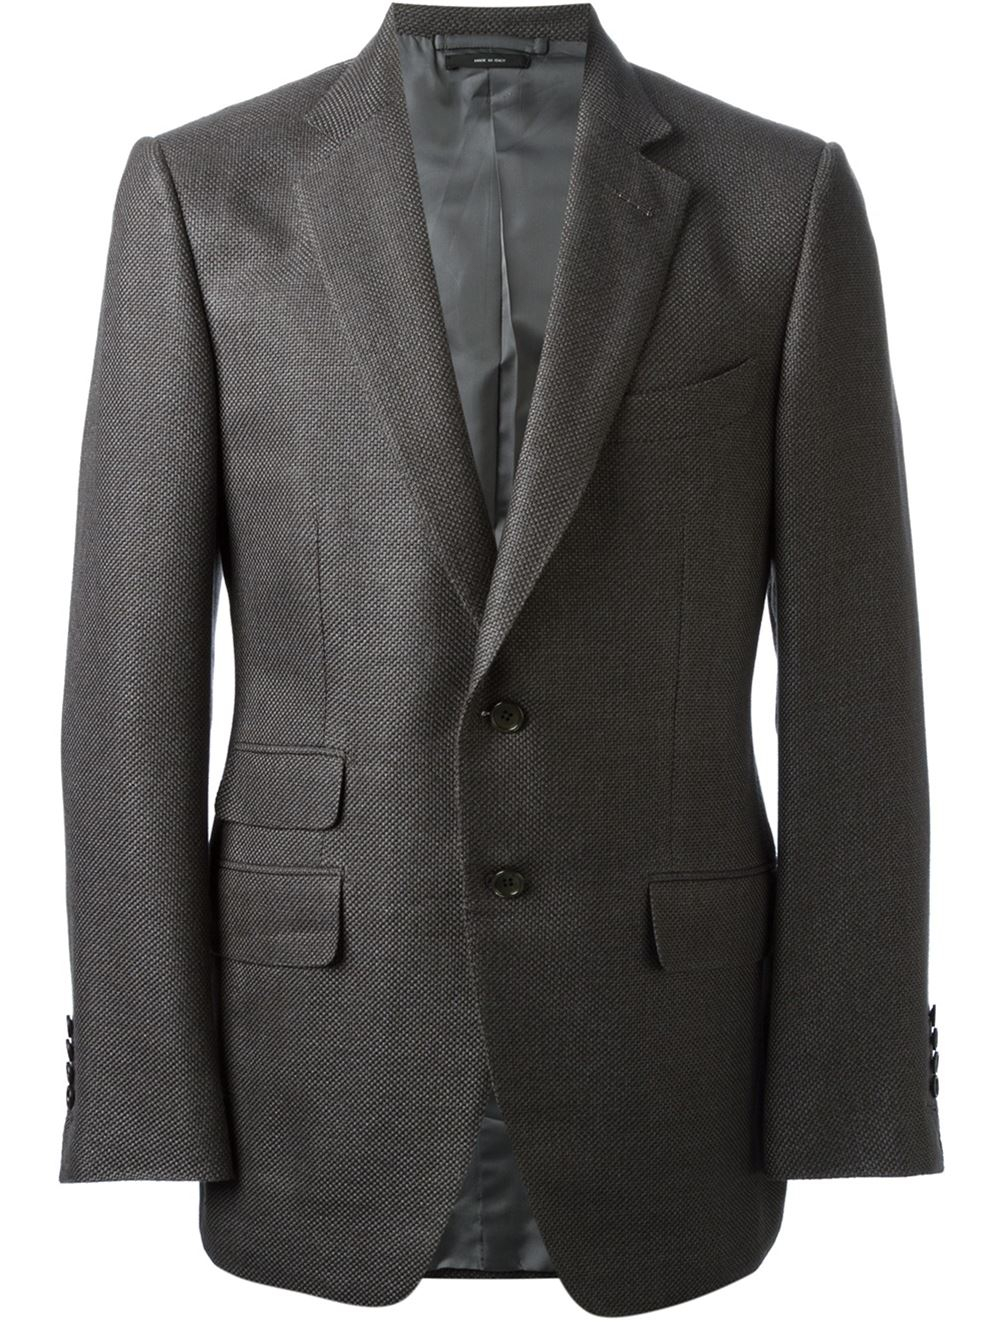 Lyst - Tom Ford Classic Two-Button Blazer in Gray for Men